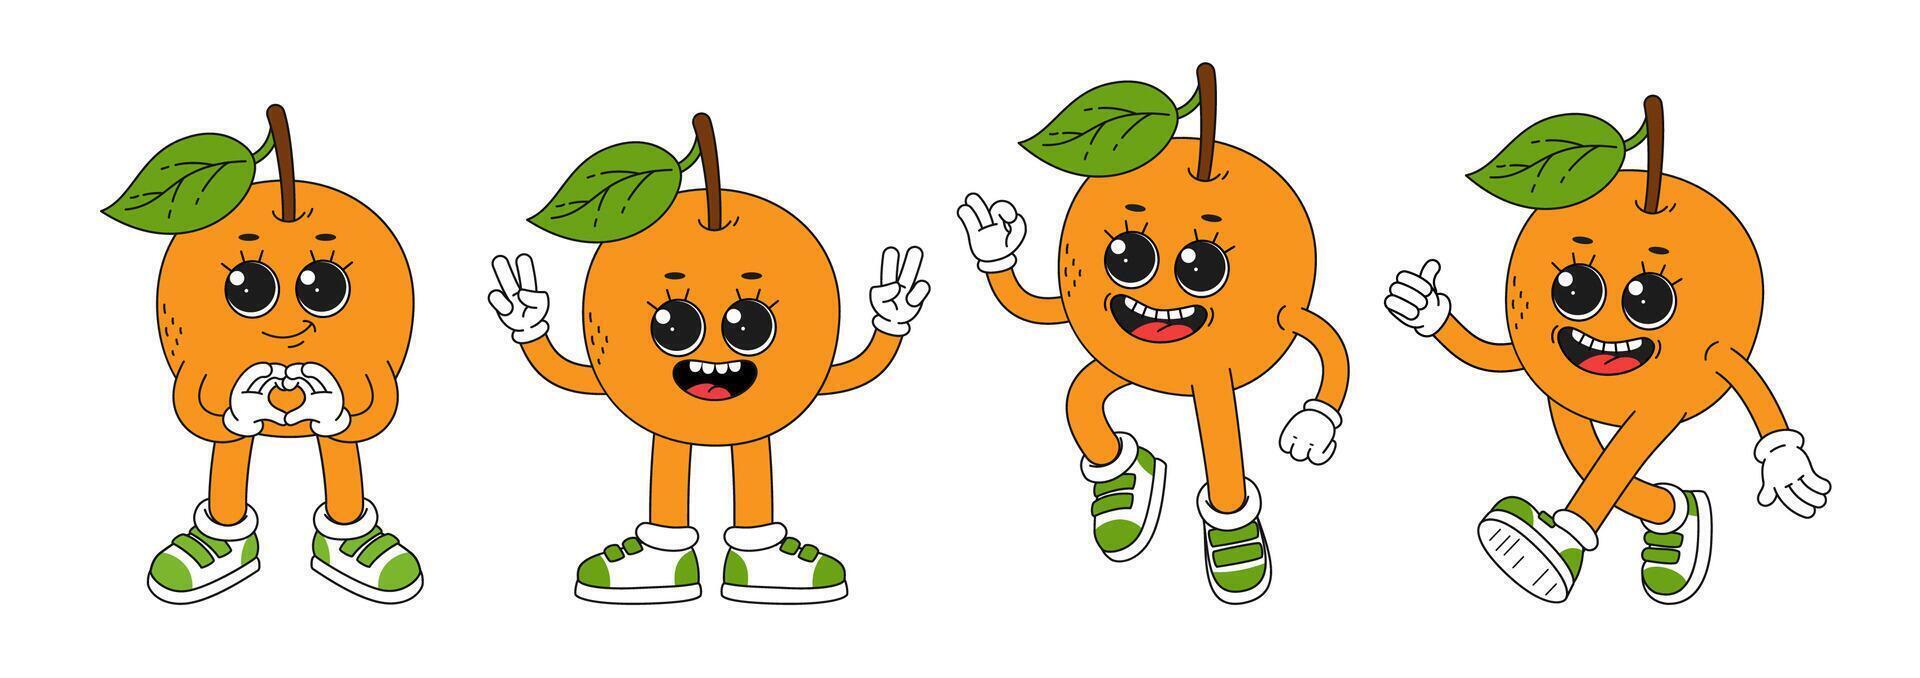 Cute cartoon orange character in different poses. Comic illustration of fresh summer fruit. vector